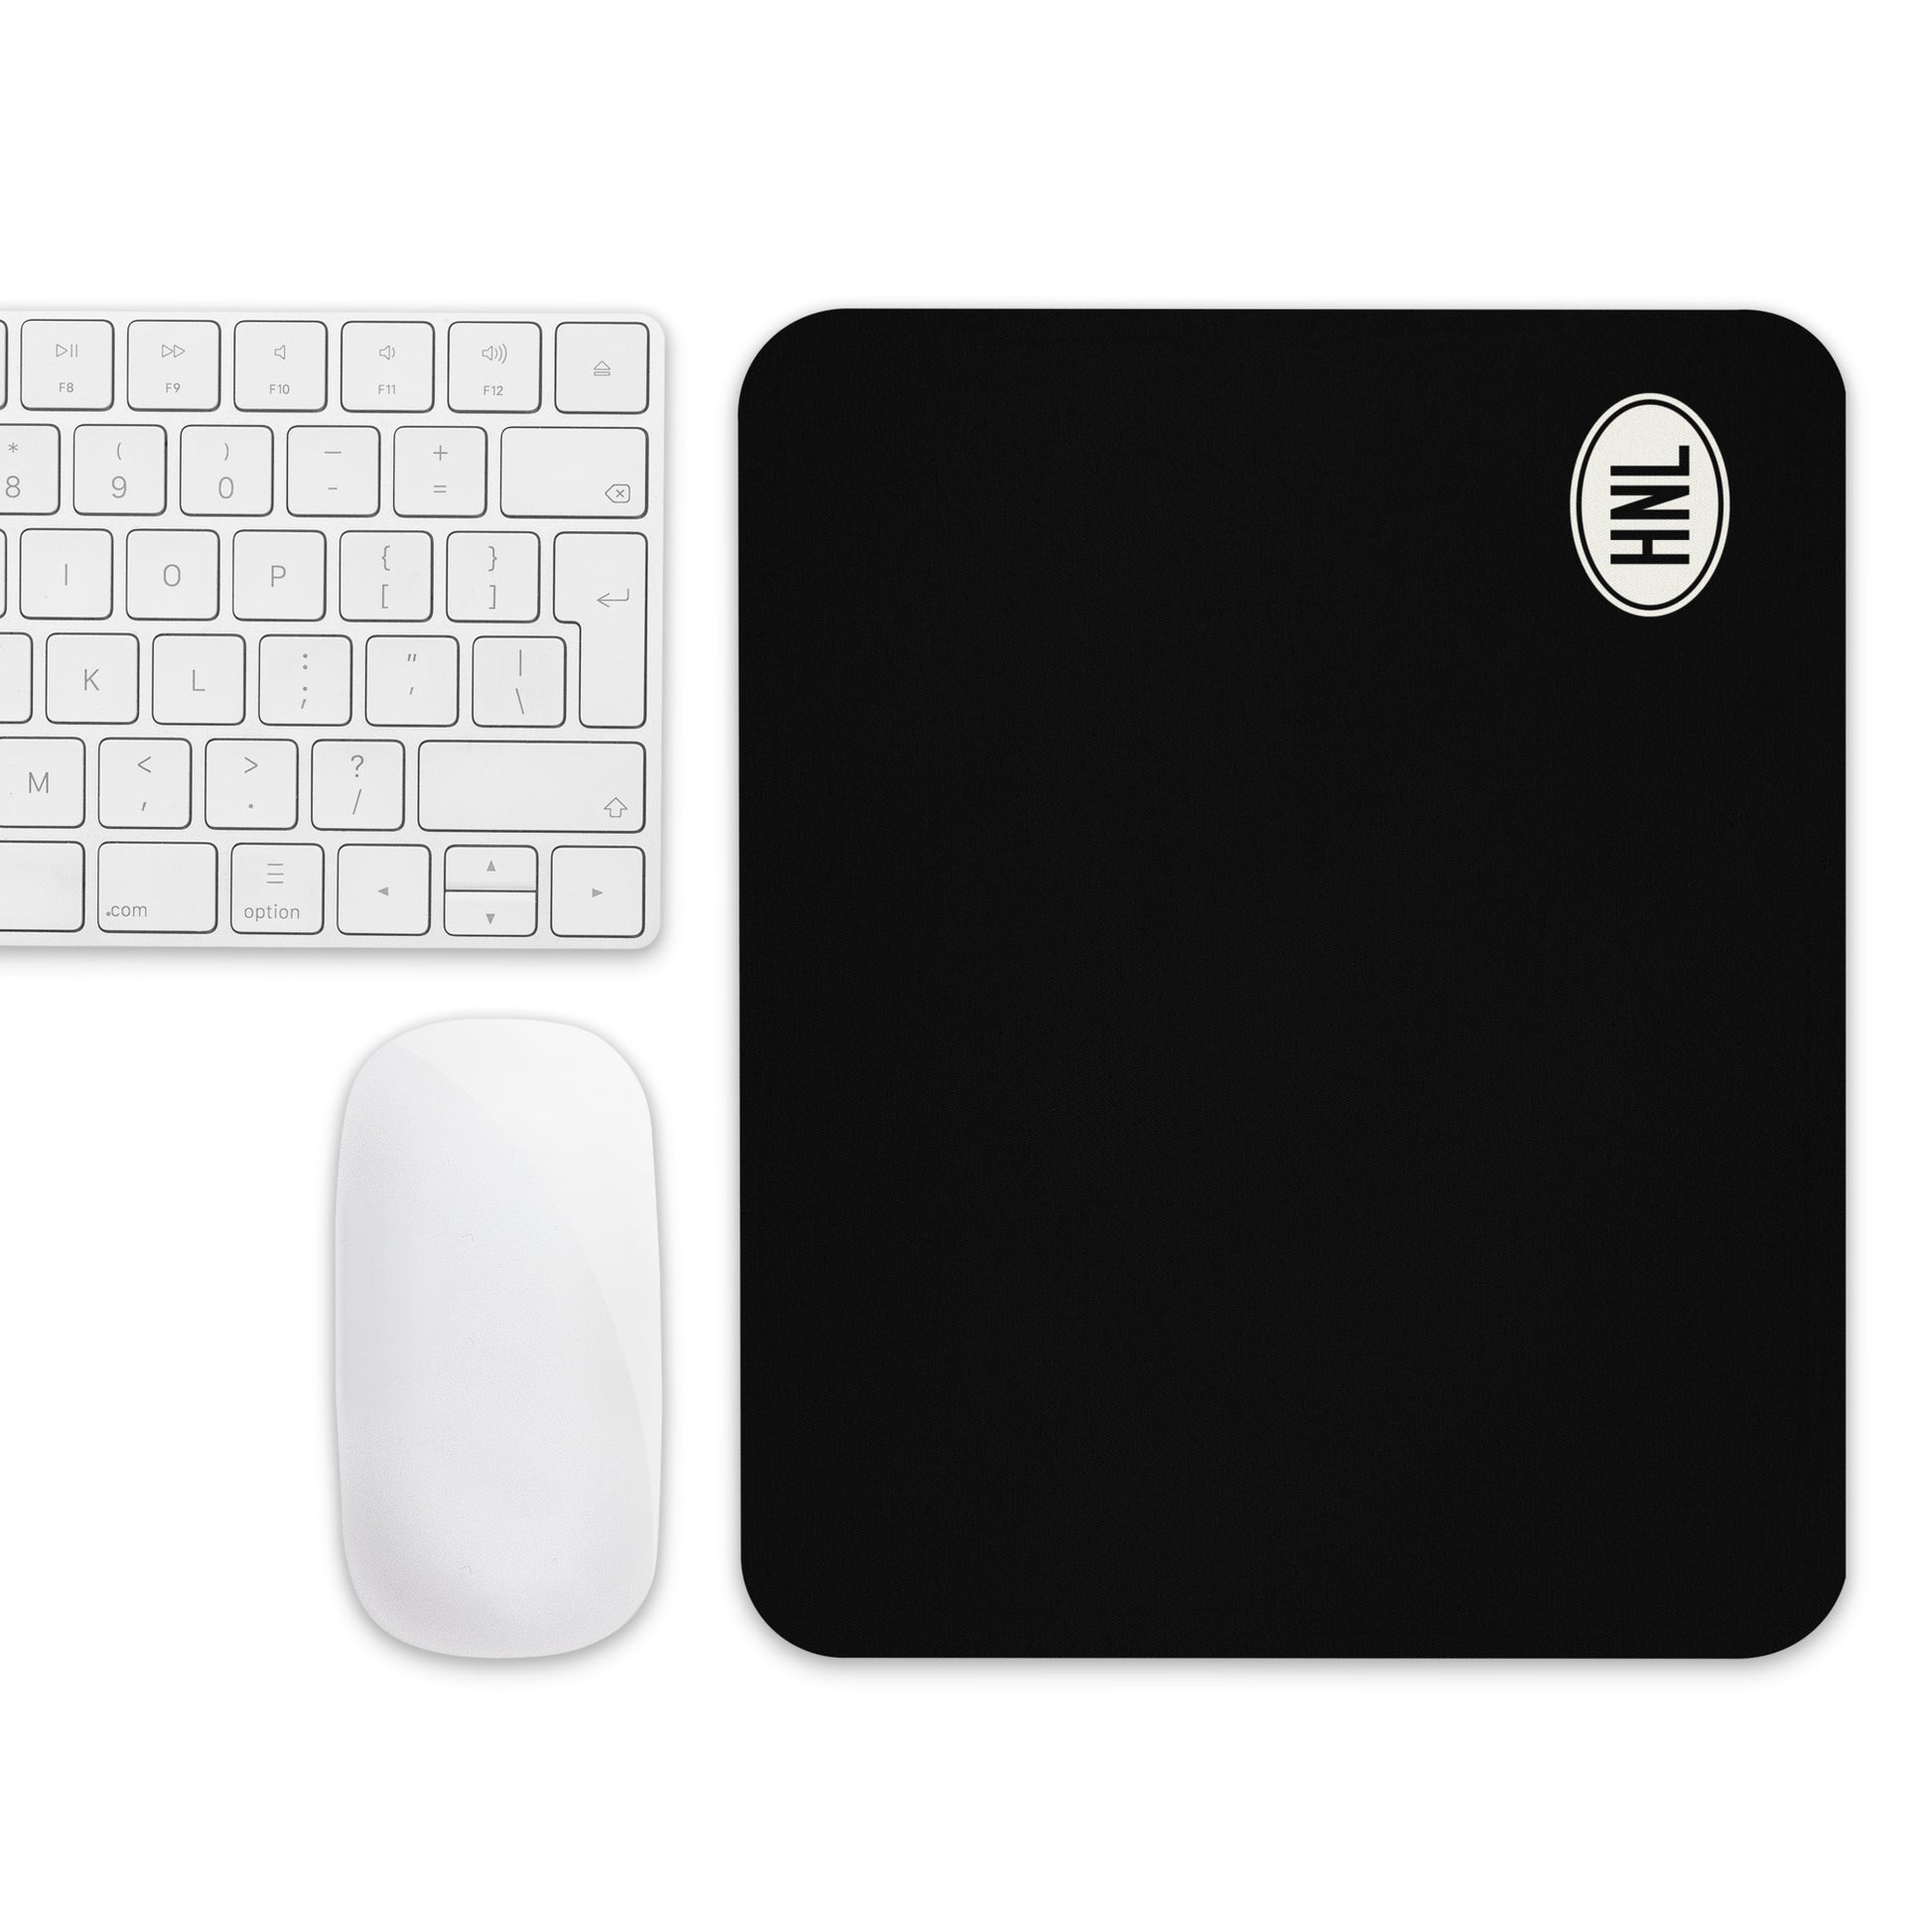 Unique Travel Gift Mouse Pad - White Oval • HNL Honolulu • YHM Designs - Image 04